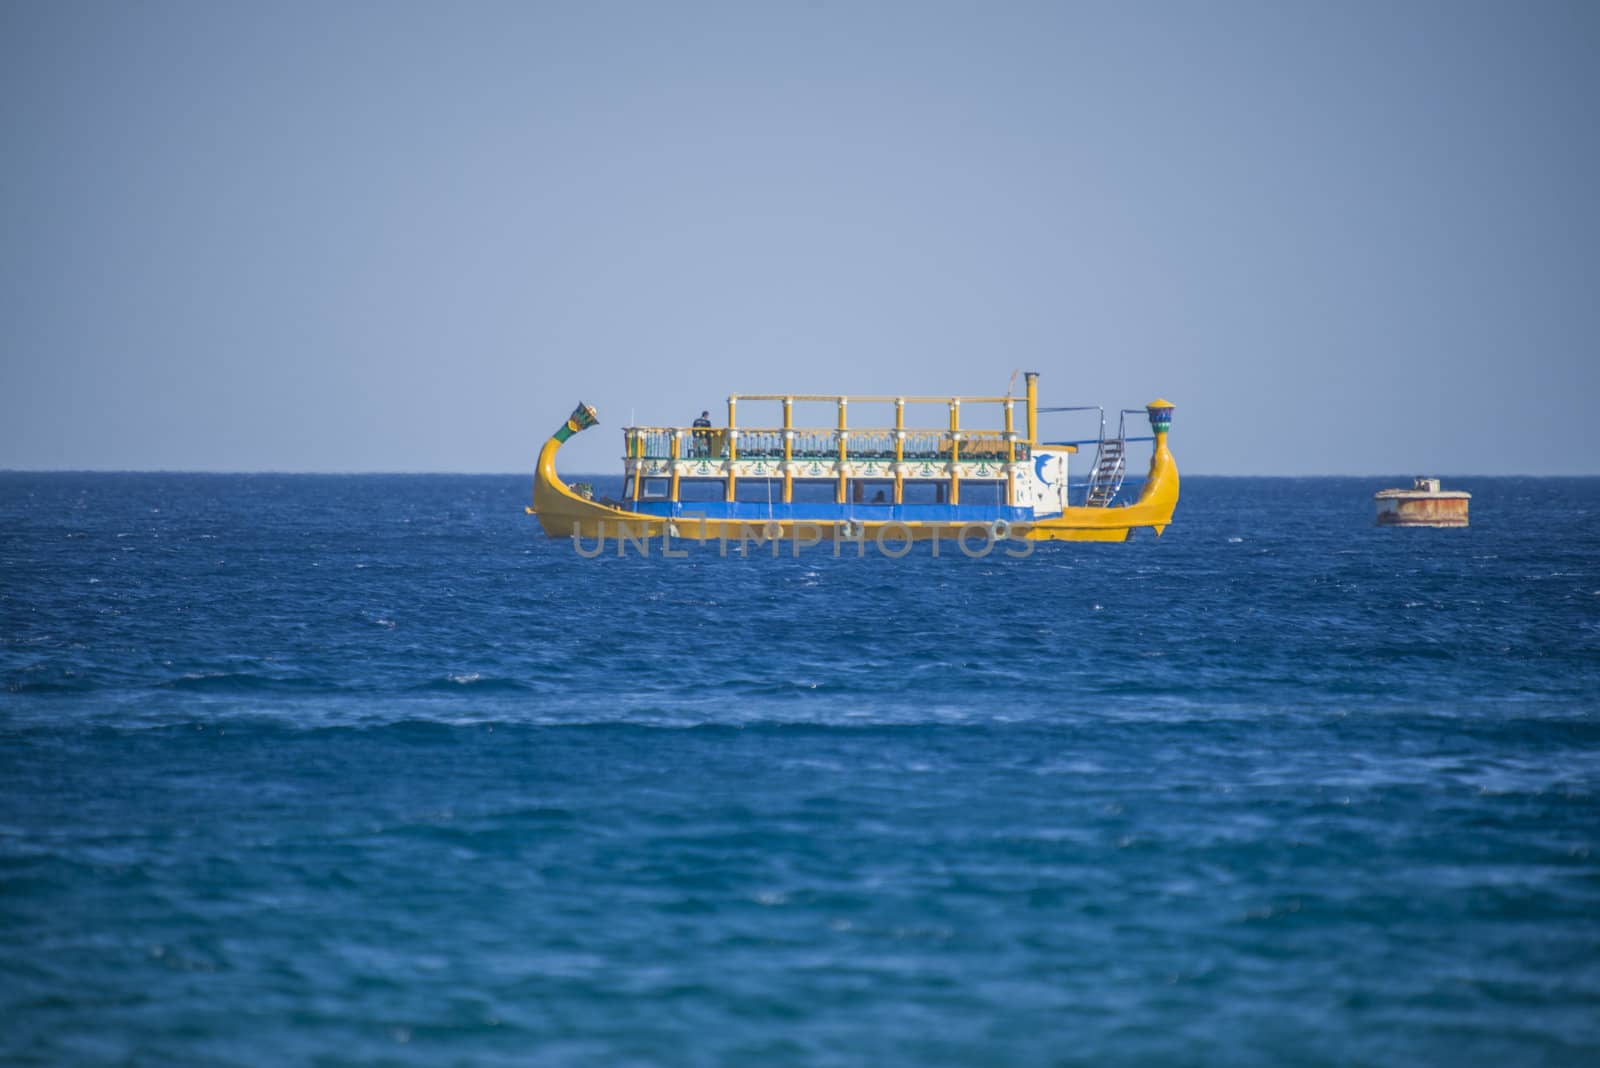 funny boat on the red sea by steirus